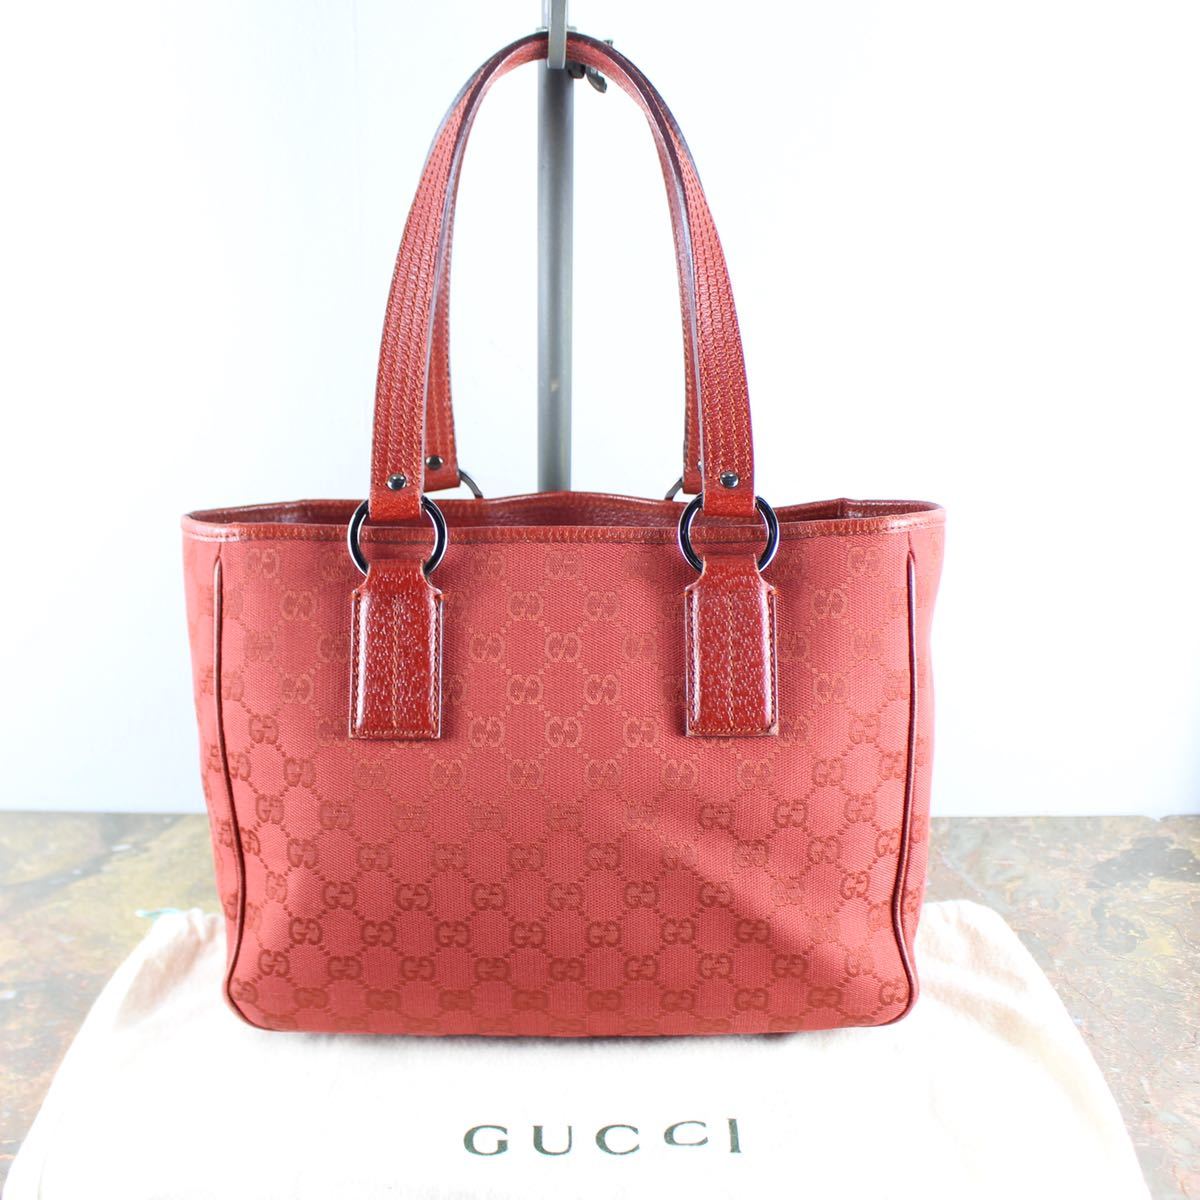 GUCCI GG PATTERNED TOTE BAG MADE IN ITALY/グッチGG柄トートバッグ